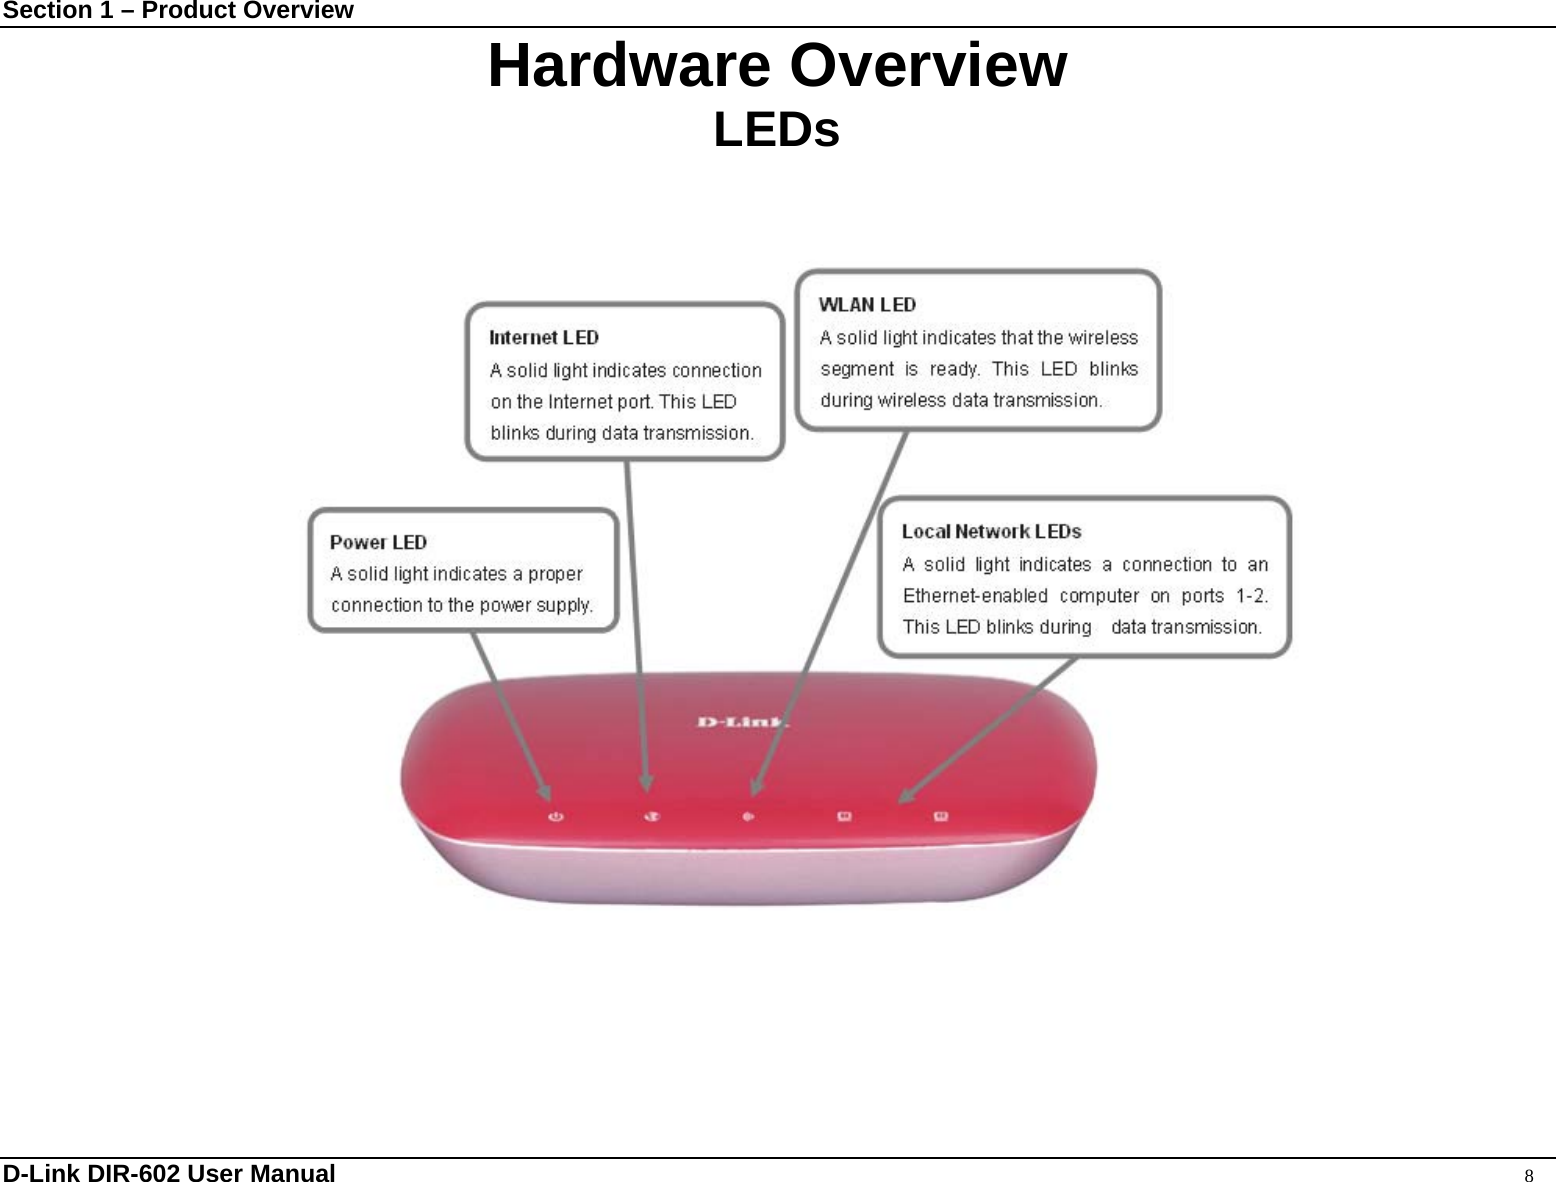 Section 1 – Product Overview  Hardware Overview LEDs   D-Link DIR-602 User Manual                                                                                               8 